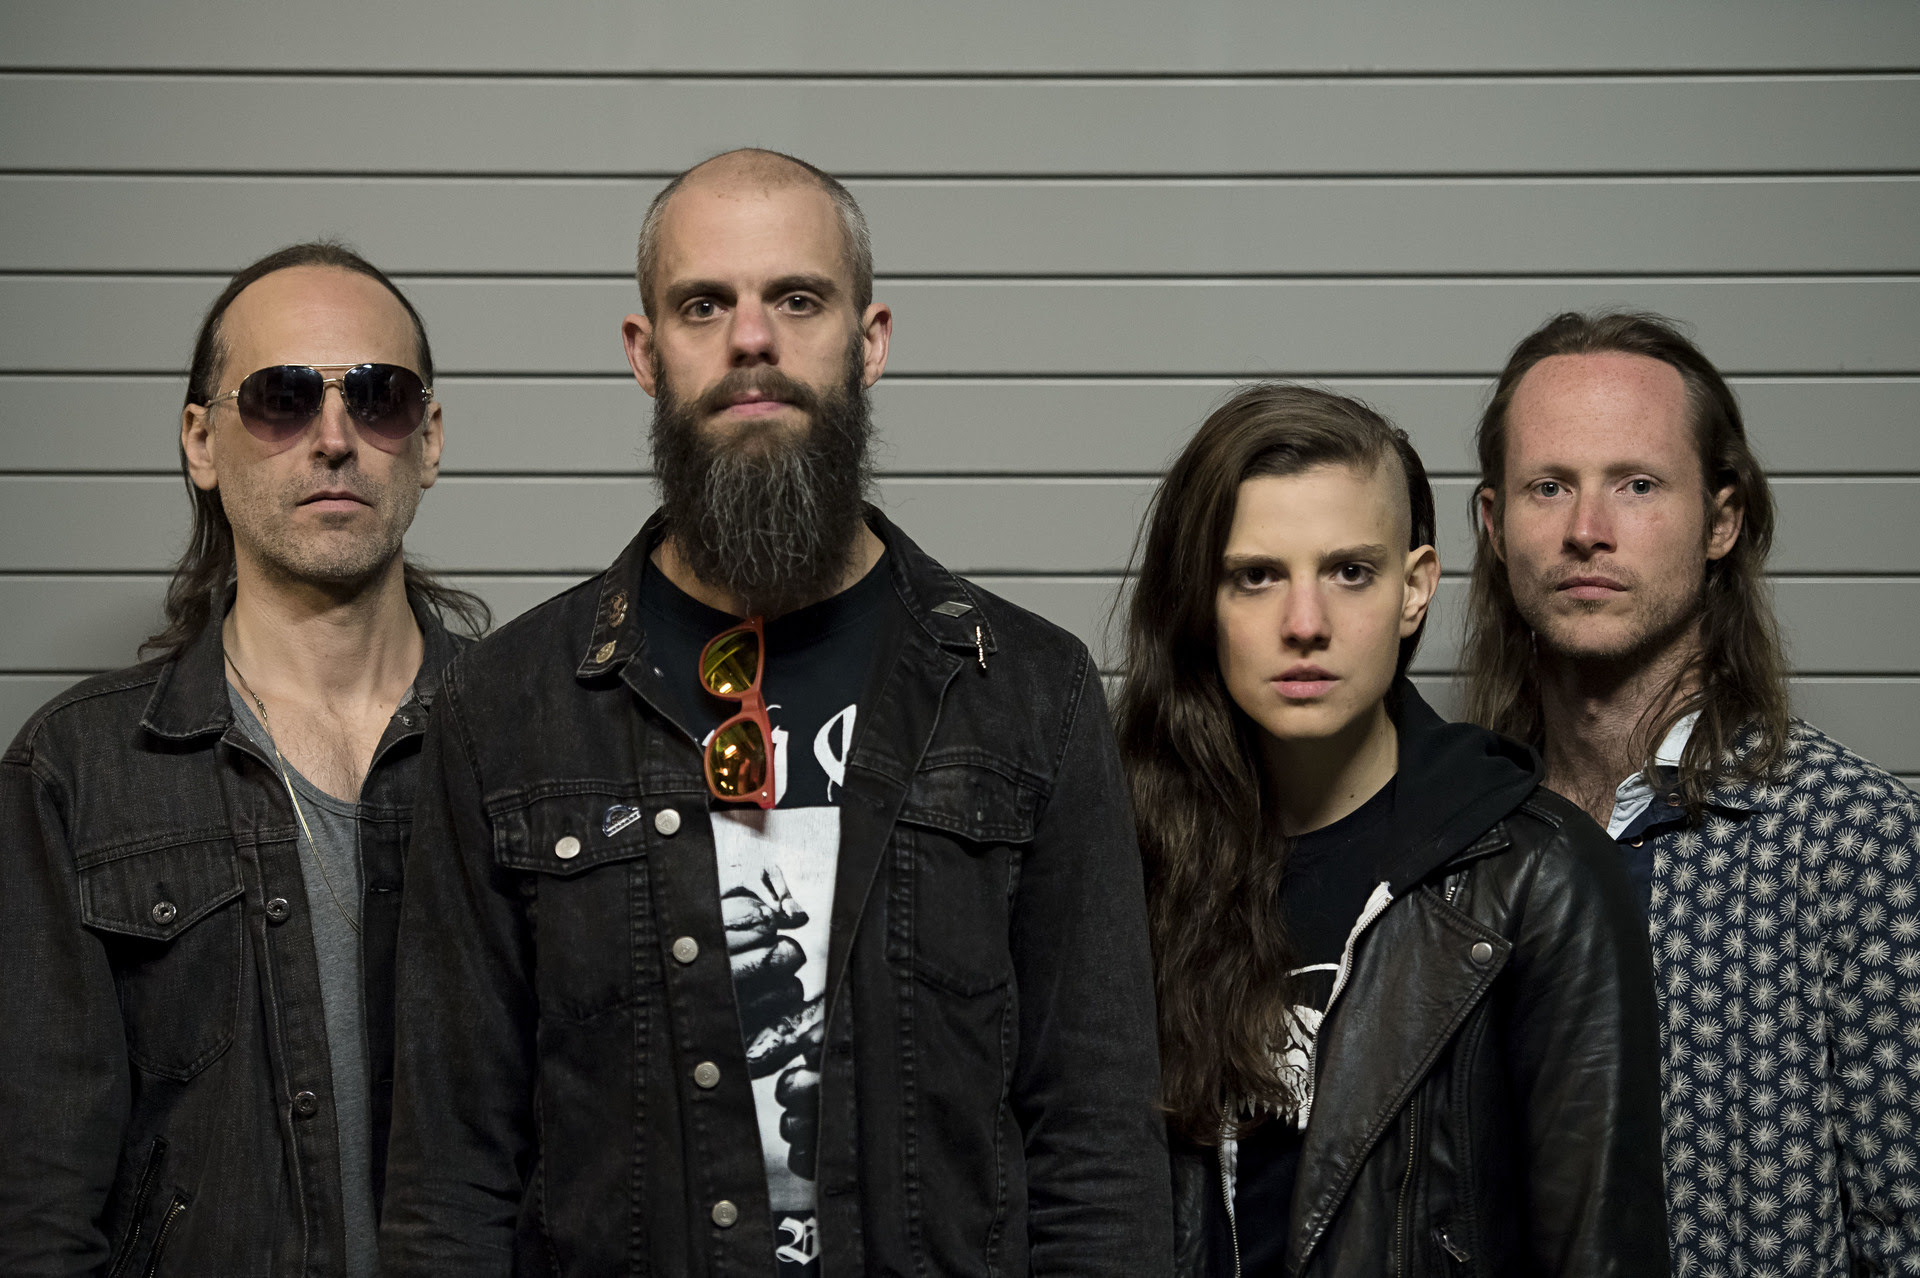 Baroness & Deafheaven announce spring 2019 co-headlining North American Tour w/ Zeal & Ardor